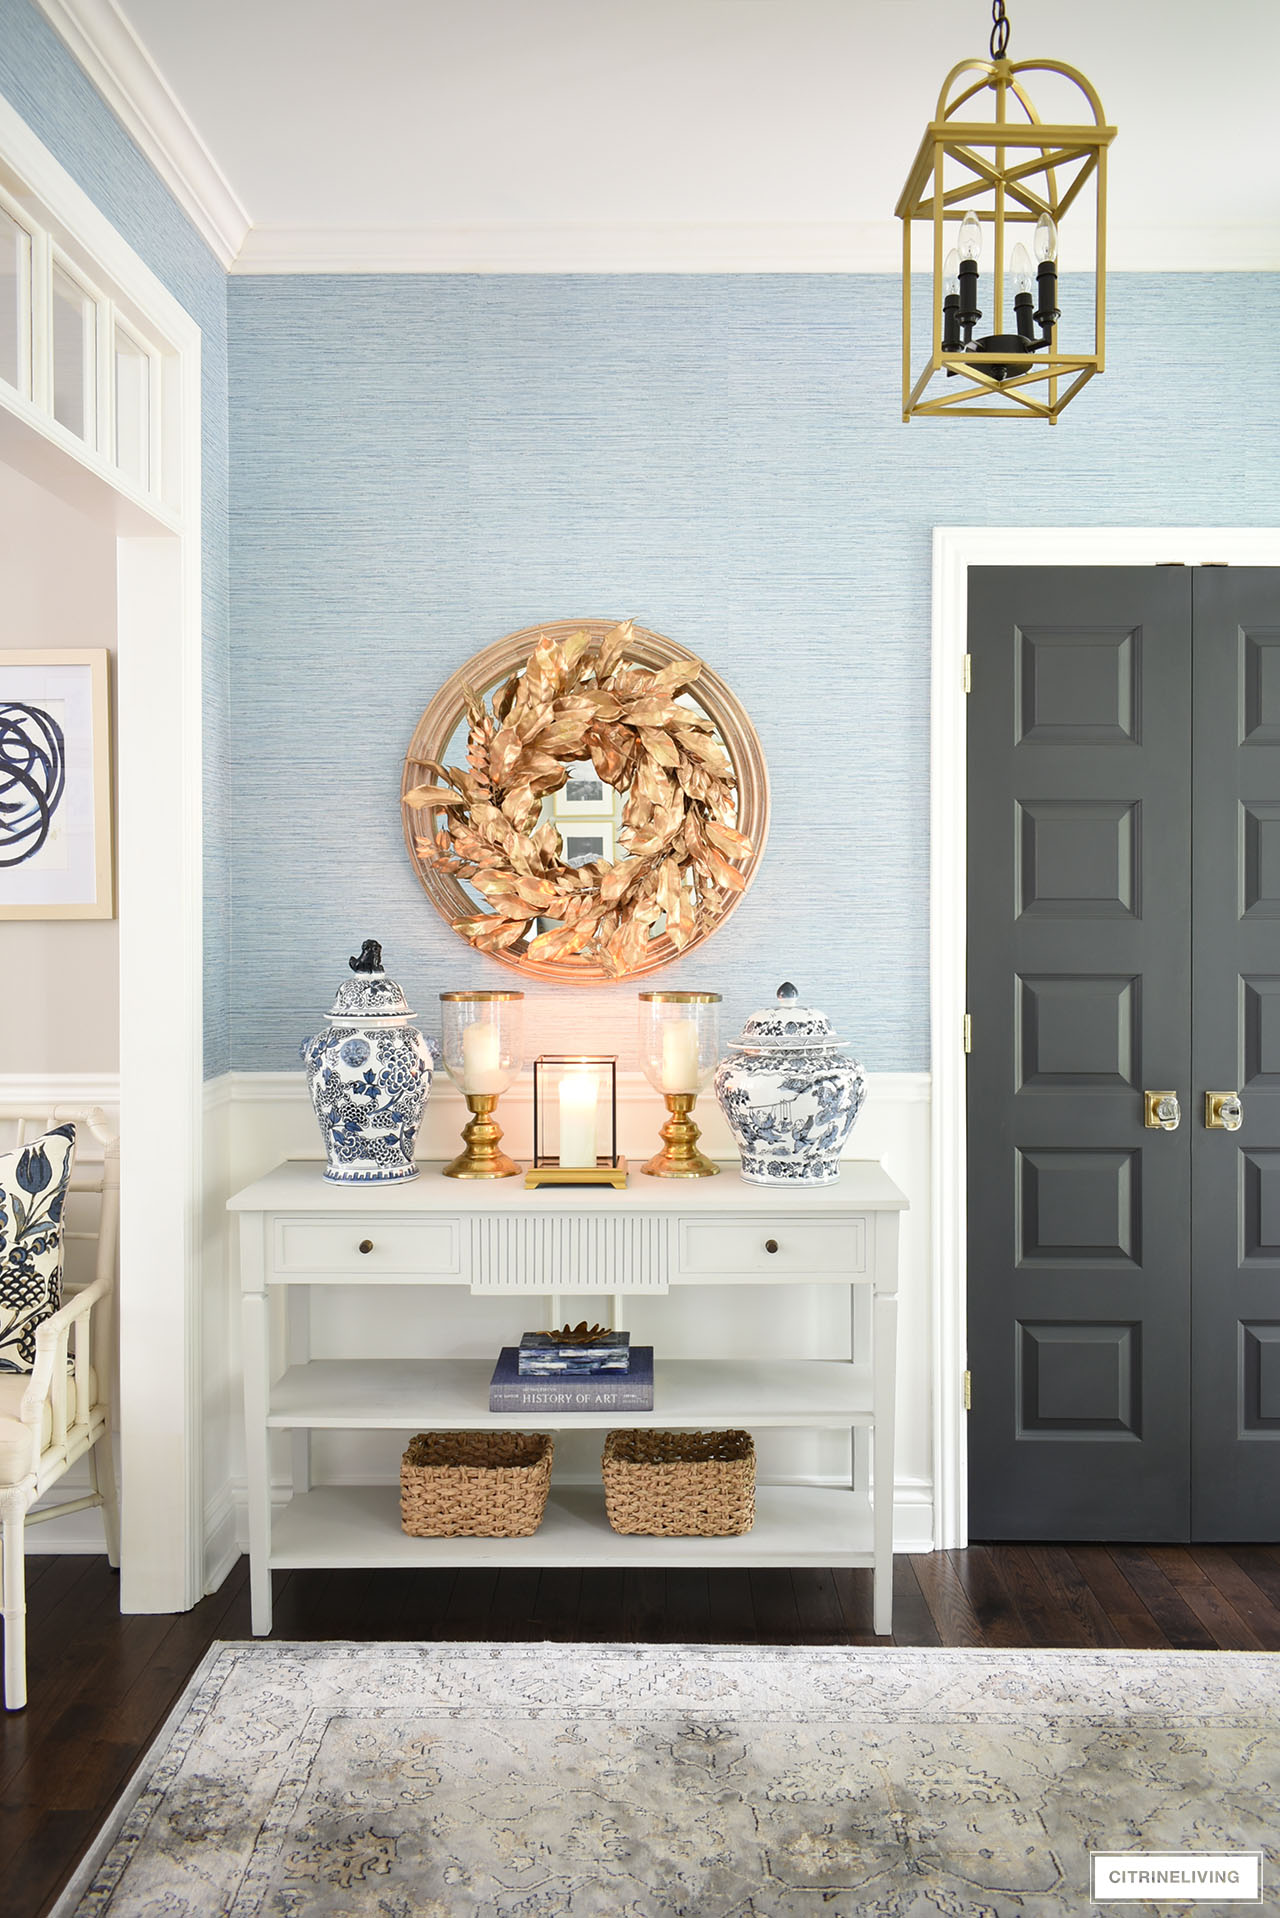 A gorgeous gold wreath, blue and white ginger jars, gold candleholders, baskets and a simple vignette with a large book, decorative box and a small gold leaf, dresses up a simple and elegant entryway table for fall.